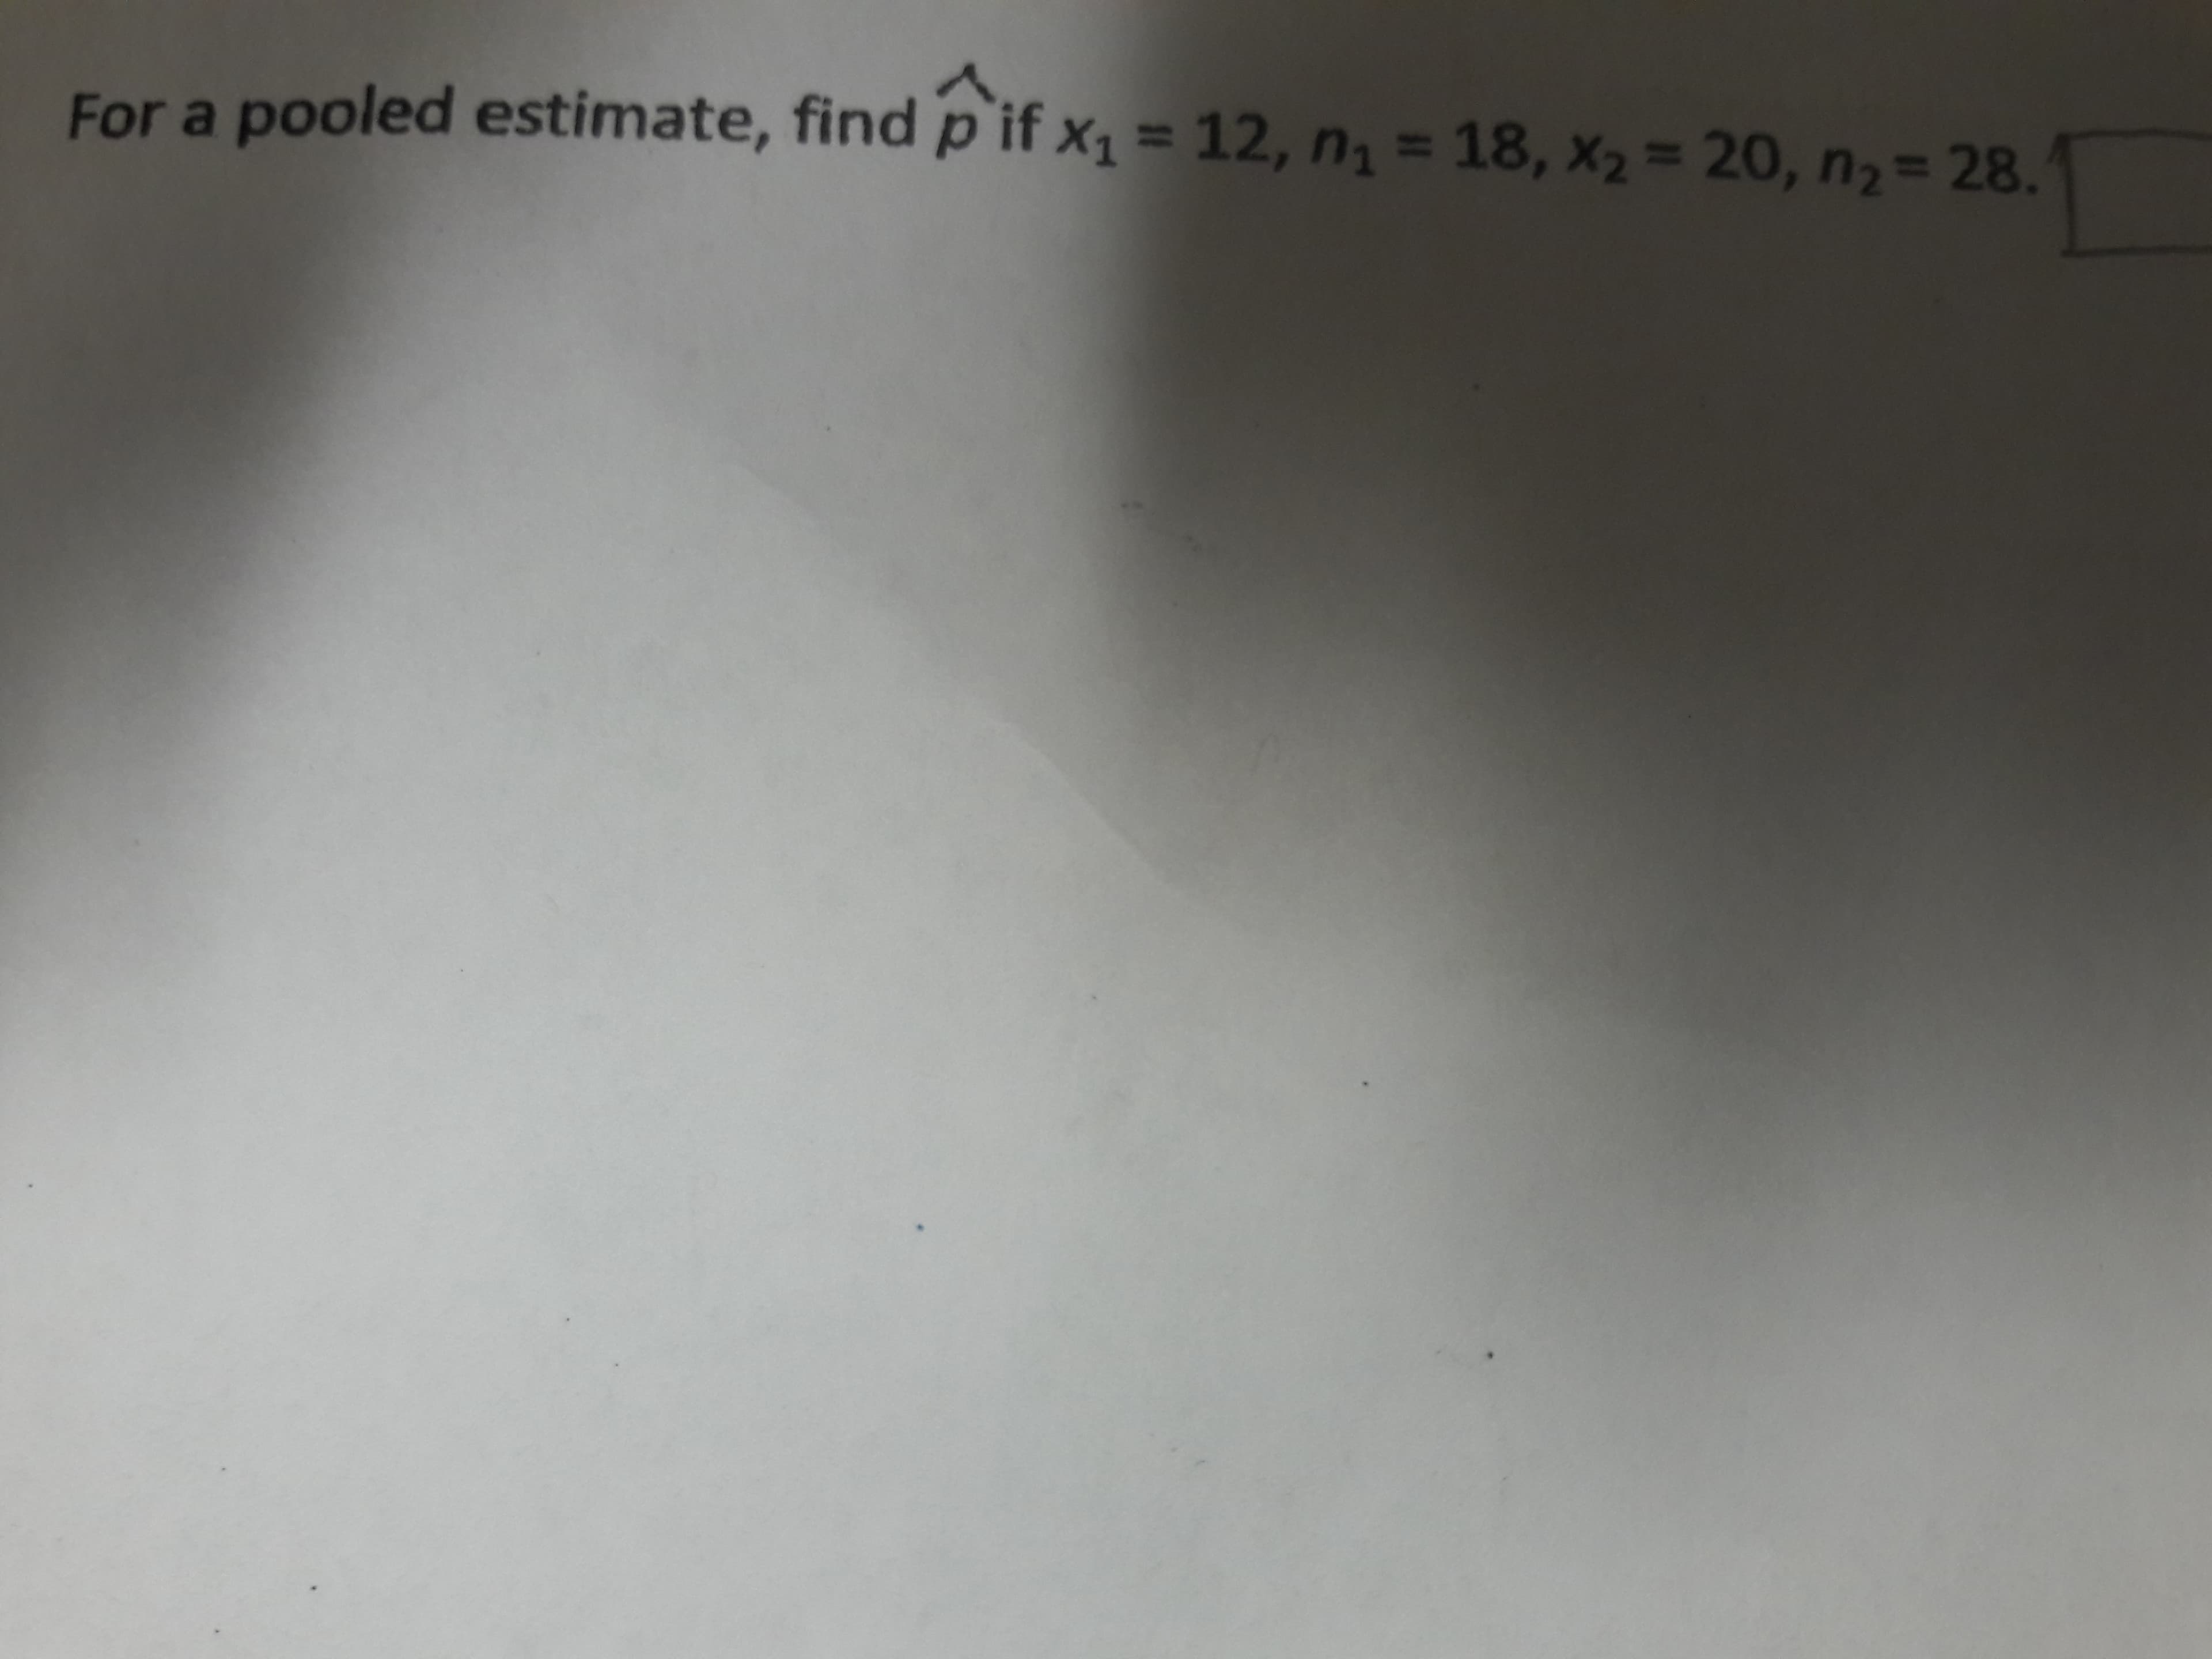 For a pooled estimate, find p if x1 = 12, n = 18, x2= 20, n,= 28.
